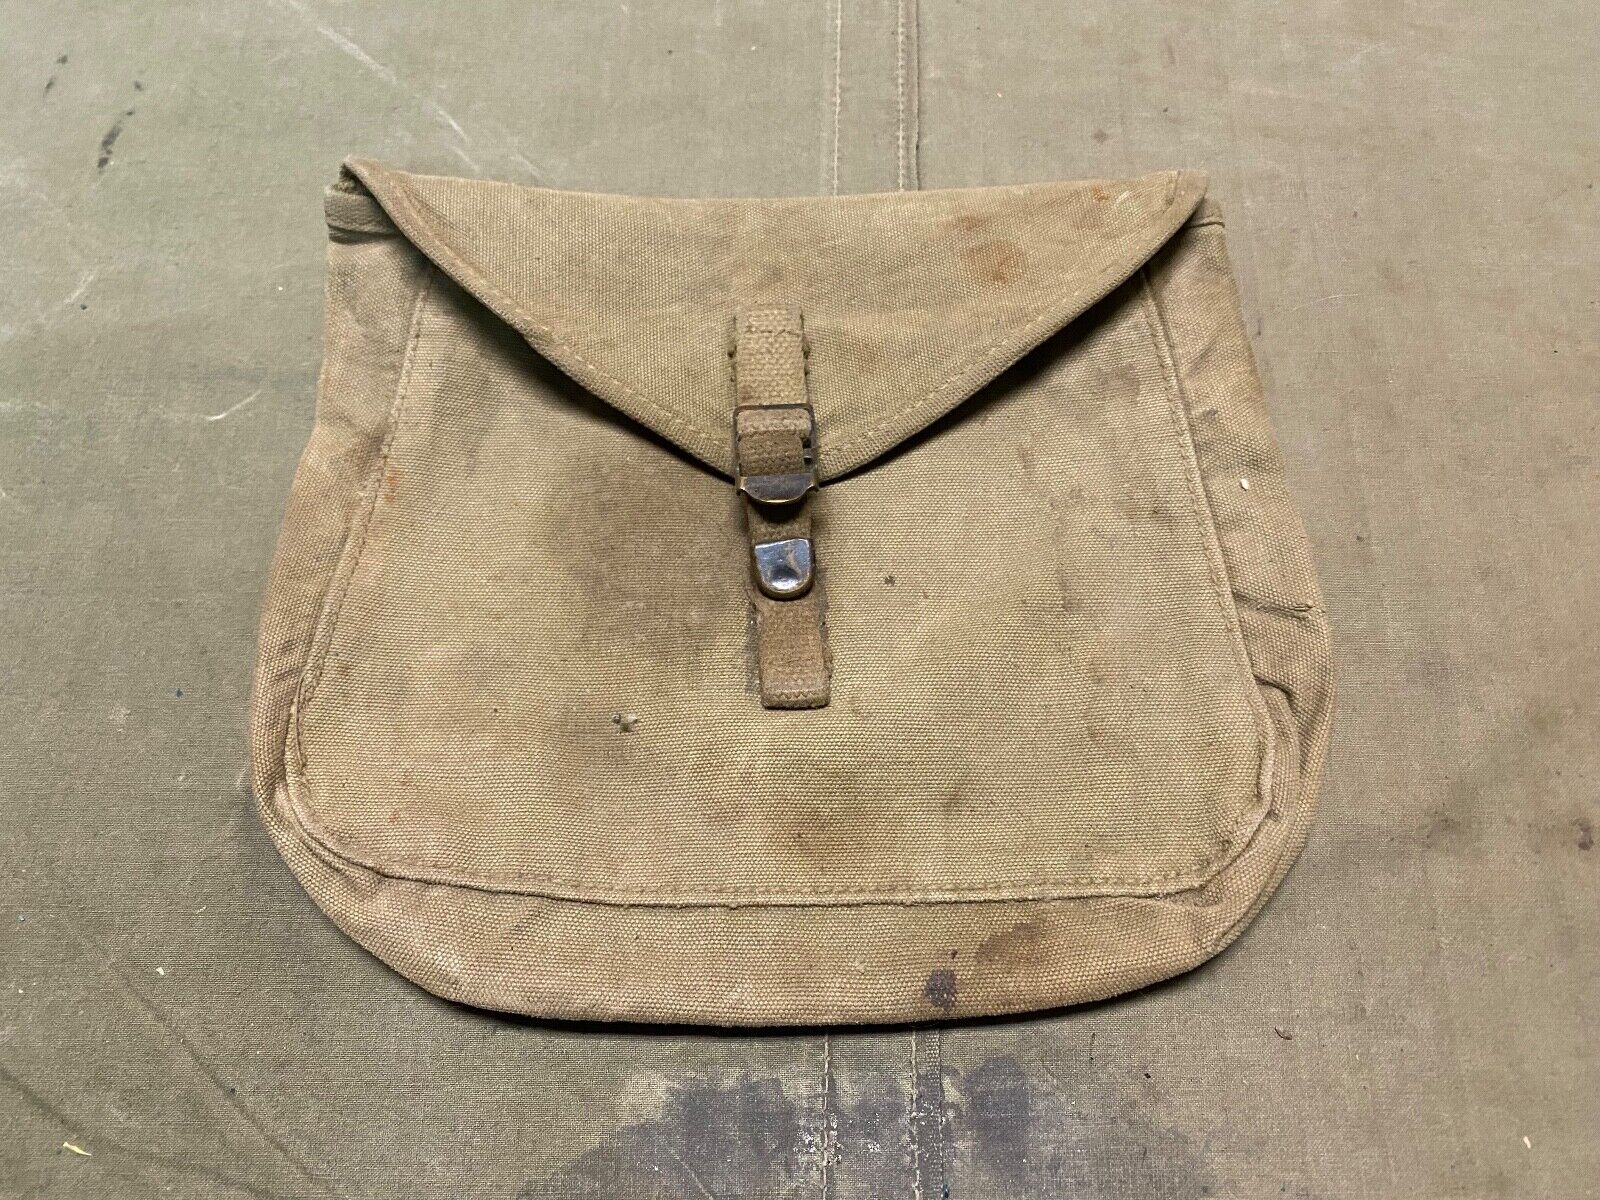 ORIGINAL WWII US ARMY M1928 HAVERSACK MESS KIT CARRY POUCH